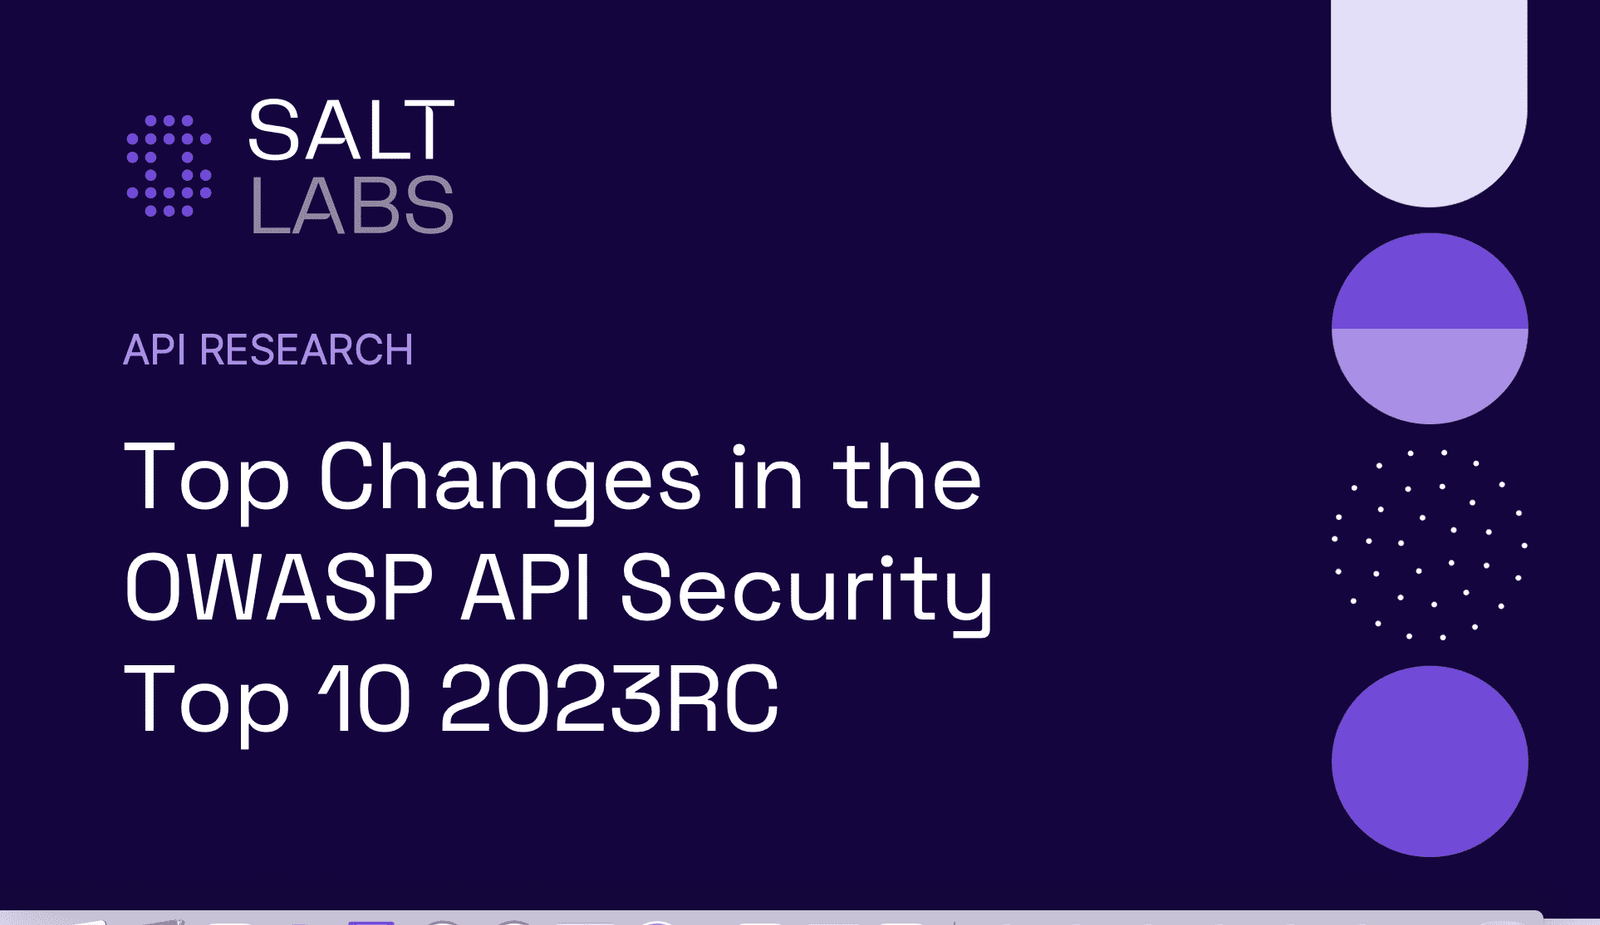 Top Changes in the OWASP API Security Top 10 2023RC